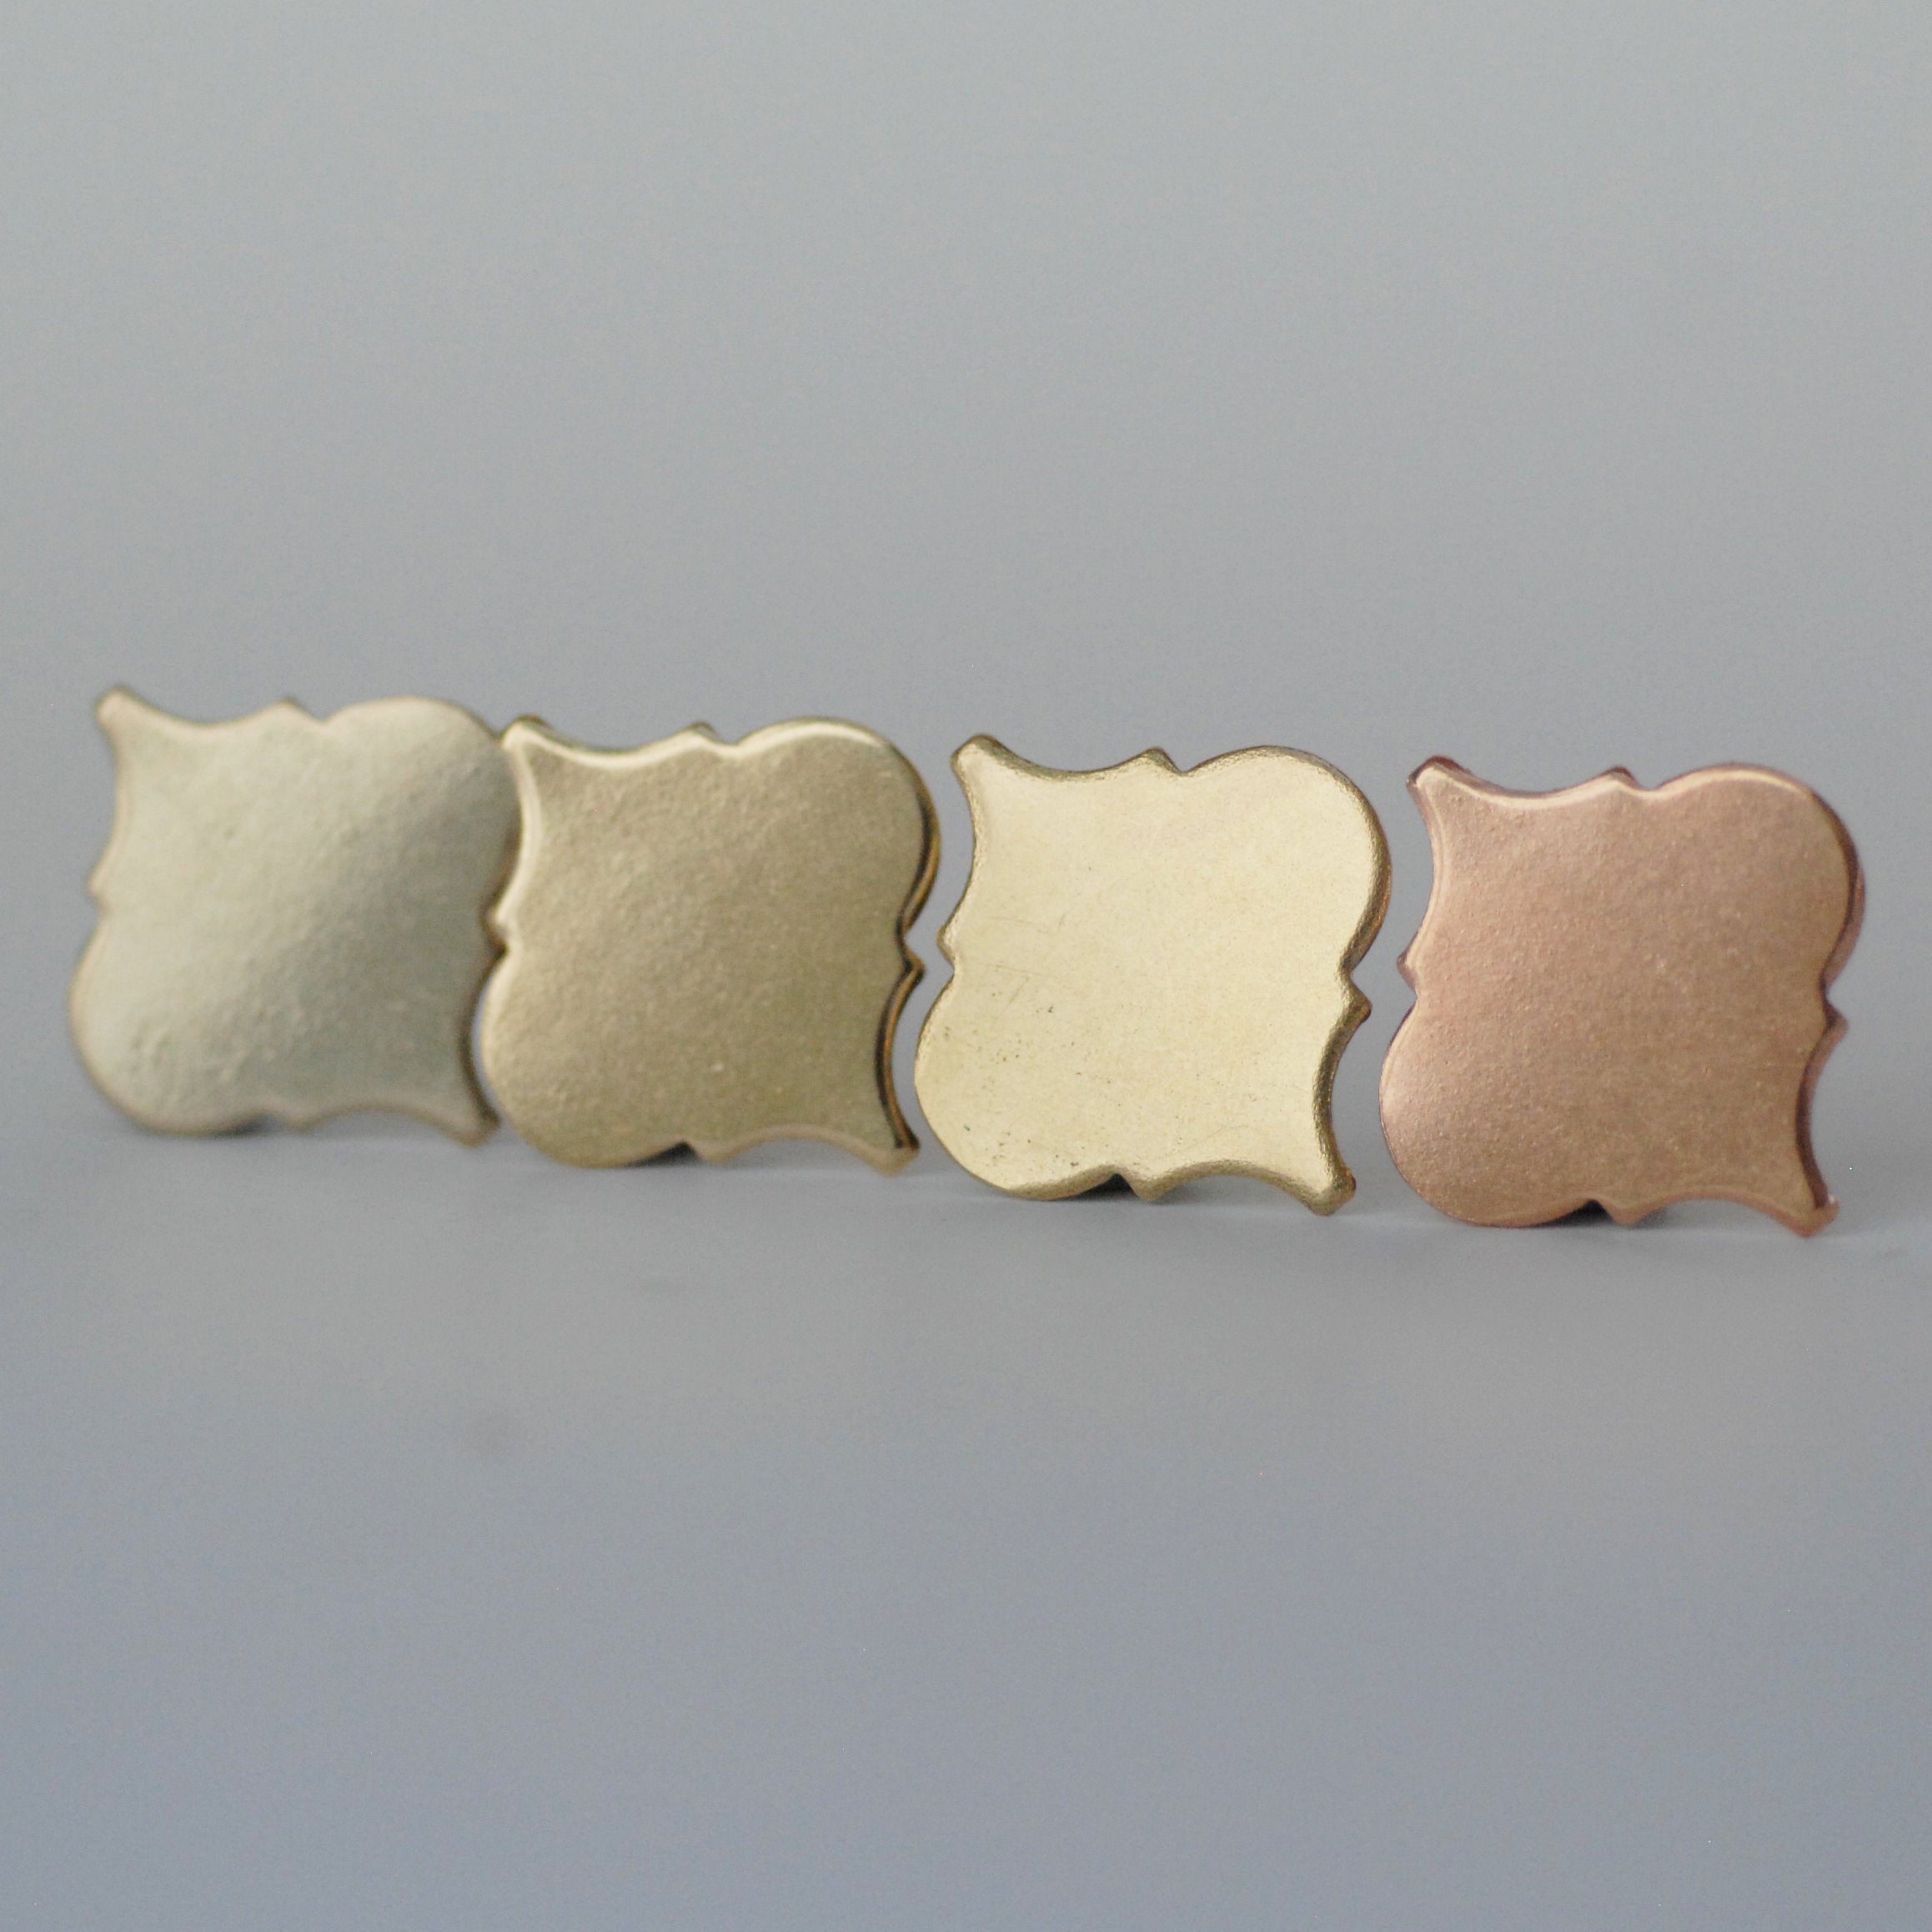 Small Moroccan Inspired metal blanks for making jewelry - copper, brass, bronze, nickel silver